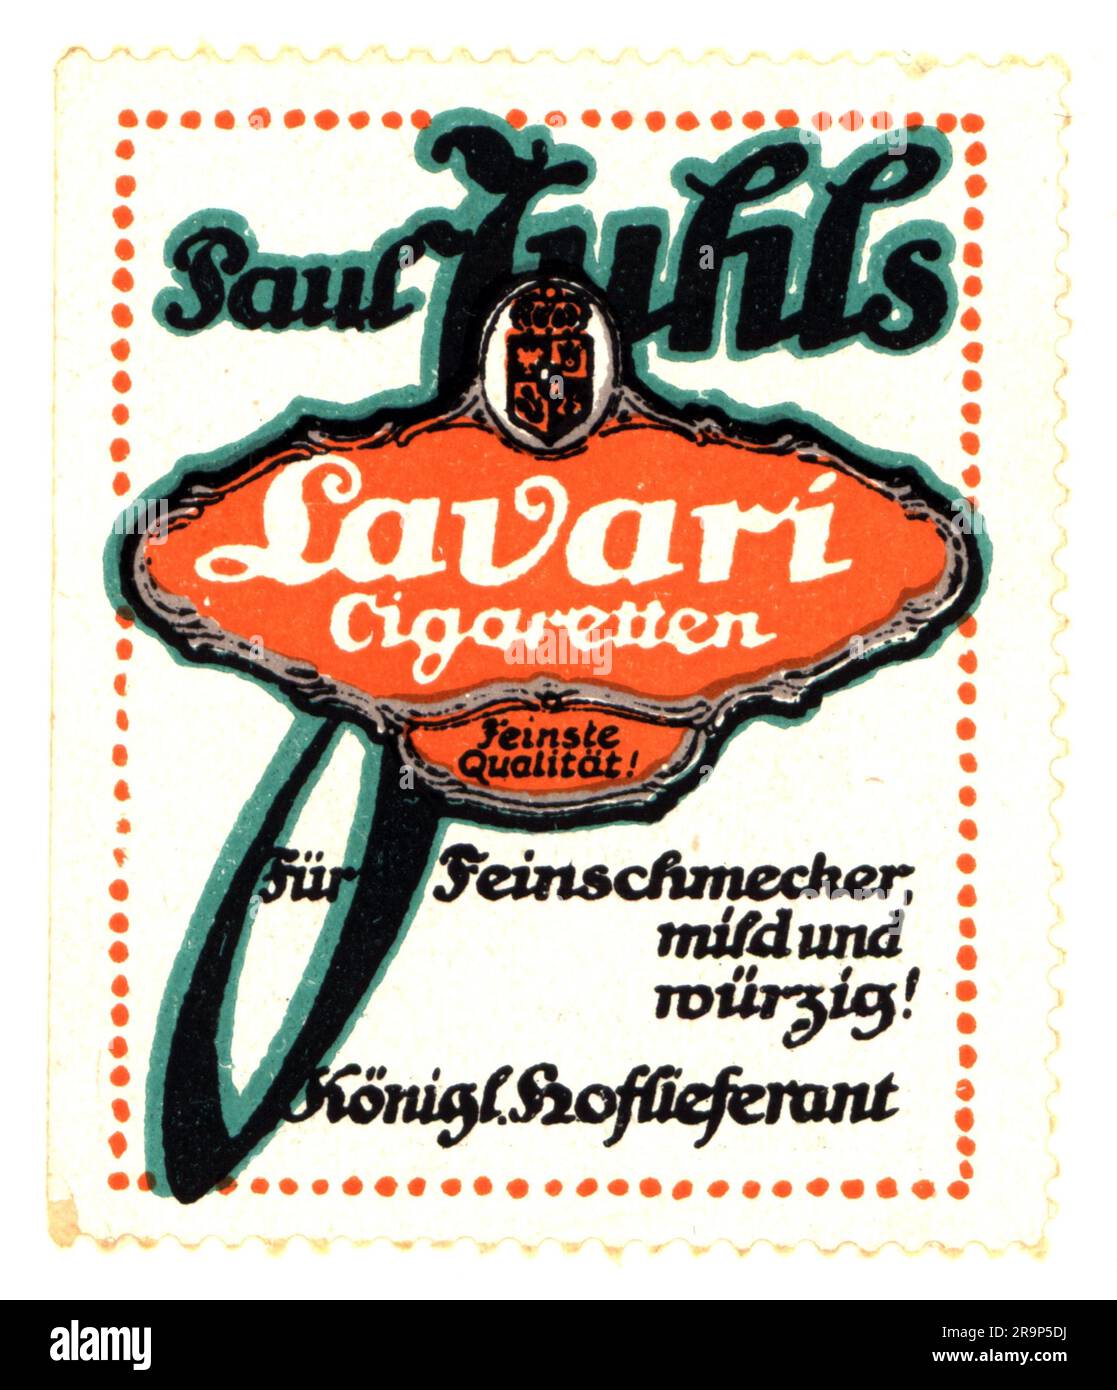 advertising, tobacco, Lavari cigarettes, Paul Juhl Tabakindustrie-Gesellschaft, Pankow, poster stamp, ADDITIONAL-RIGHTS-CLEARANCE-INFO-NOT-AVAILABLE Stock Photo